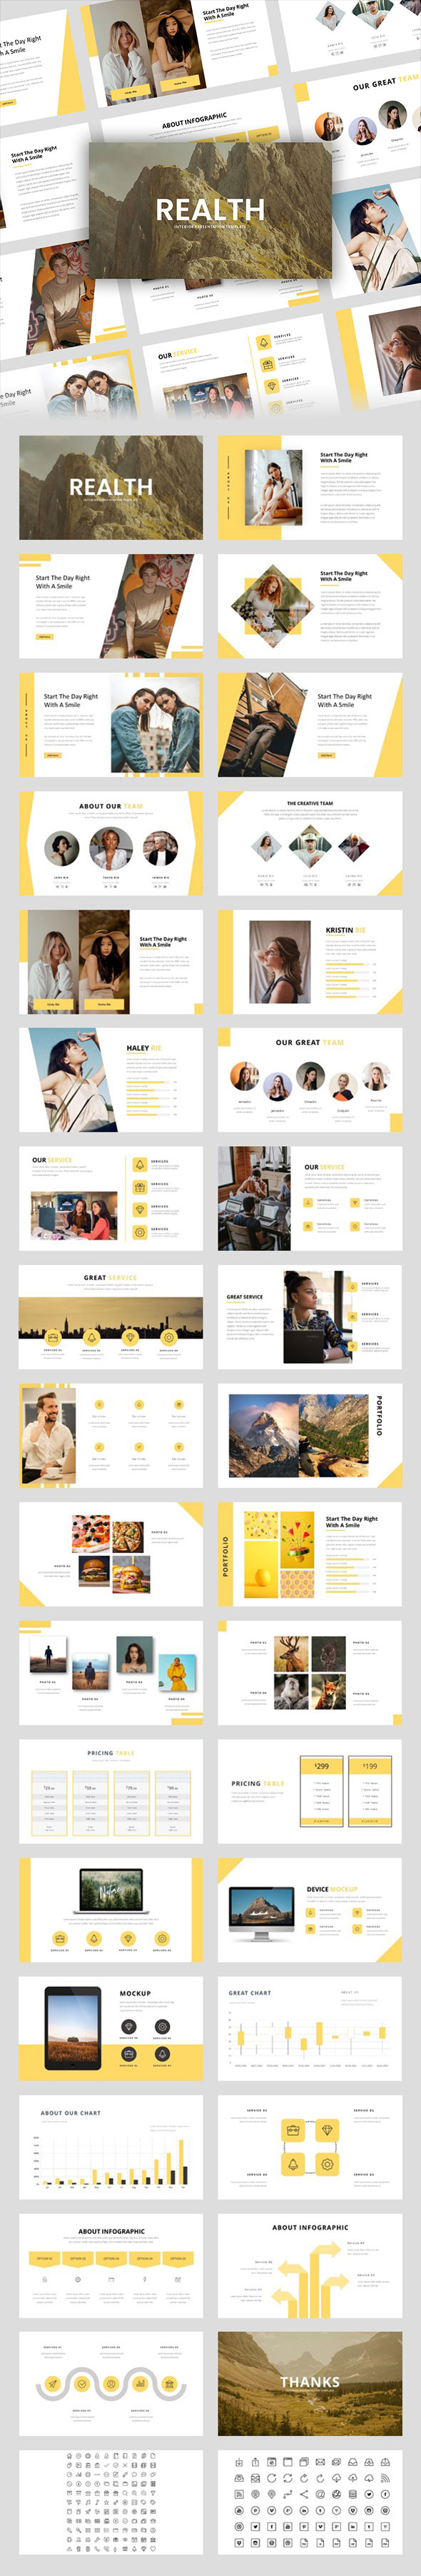 Realth – Creative Business Keynote Template